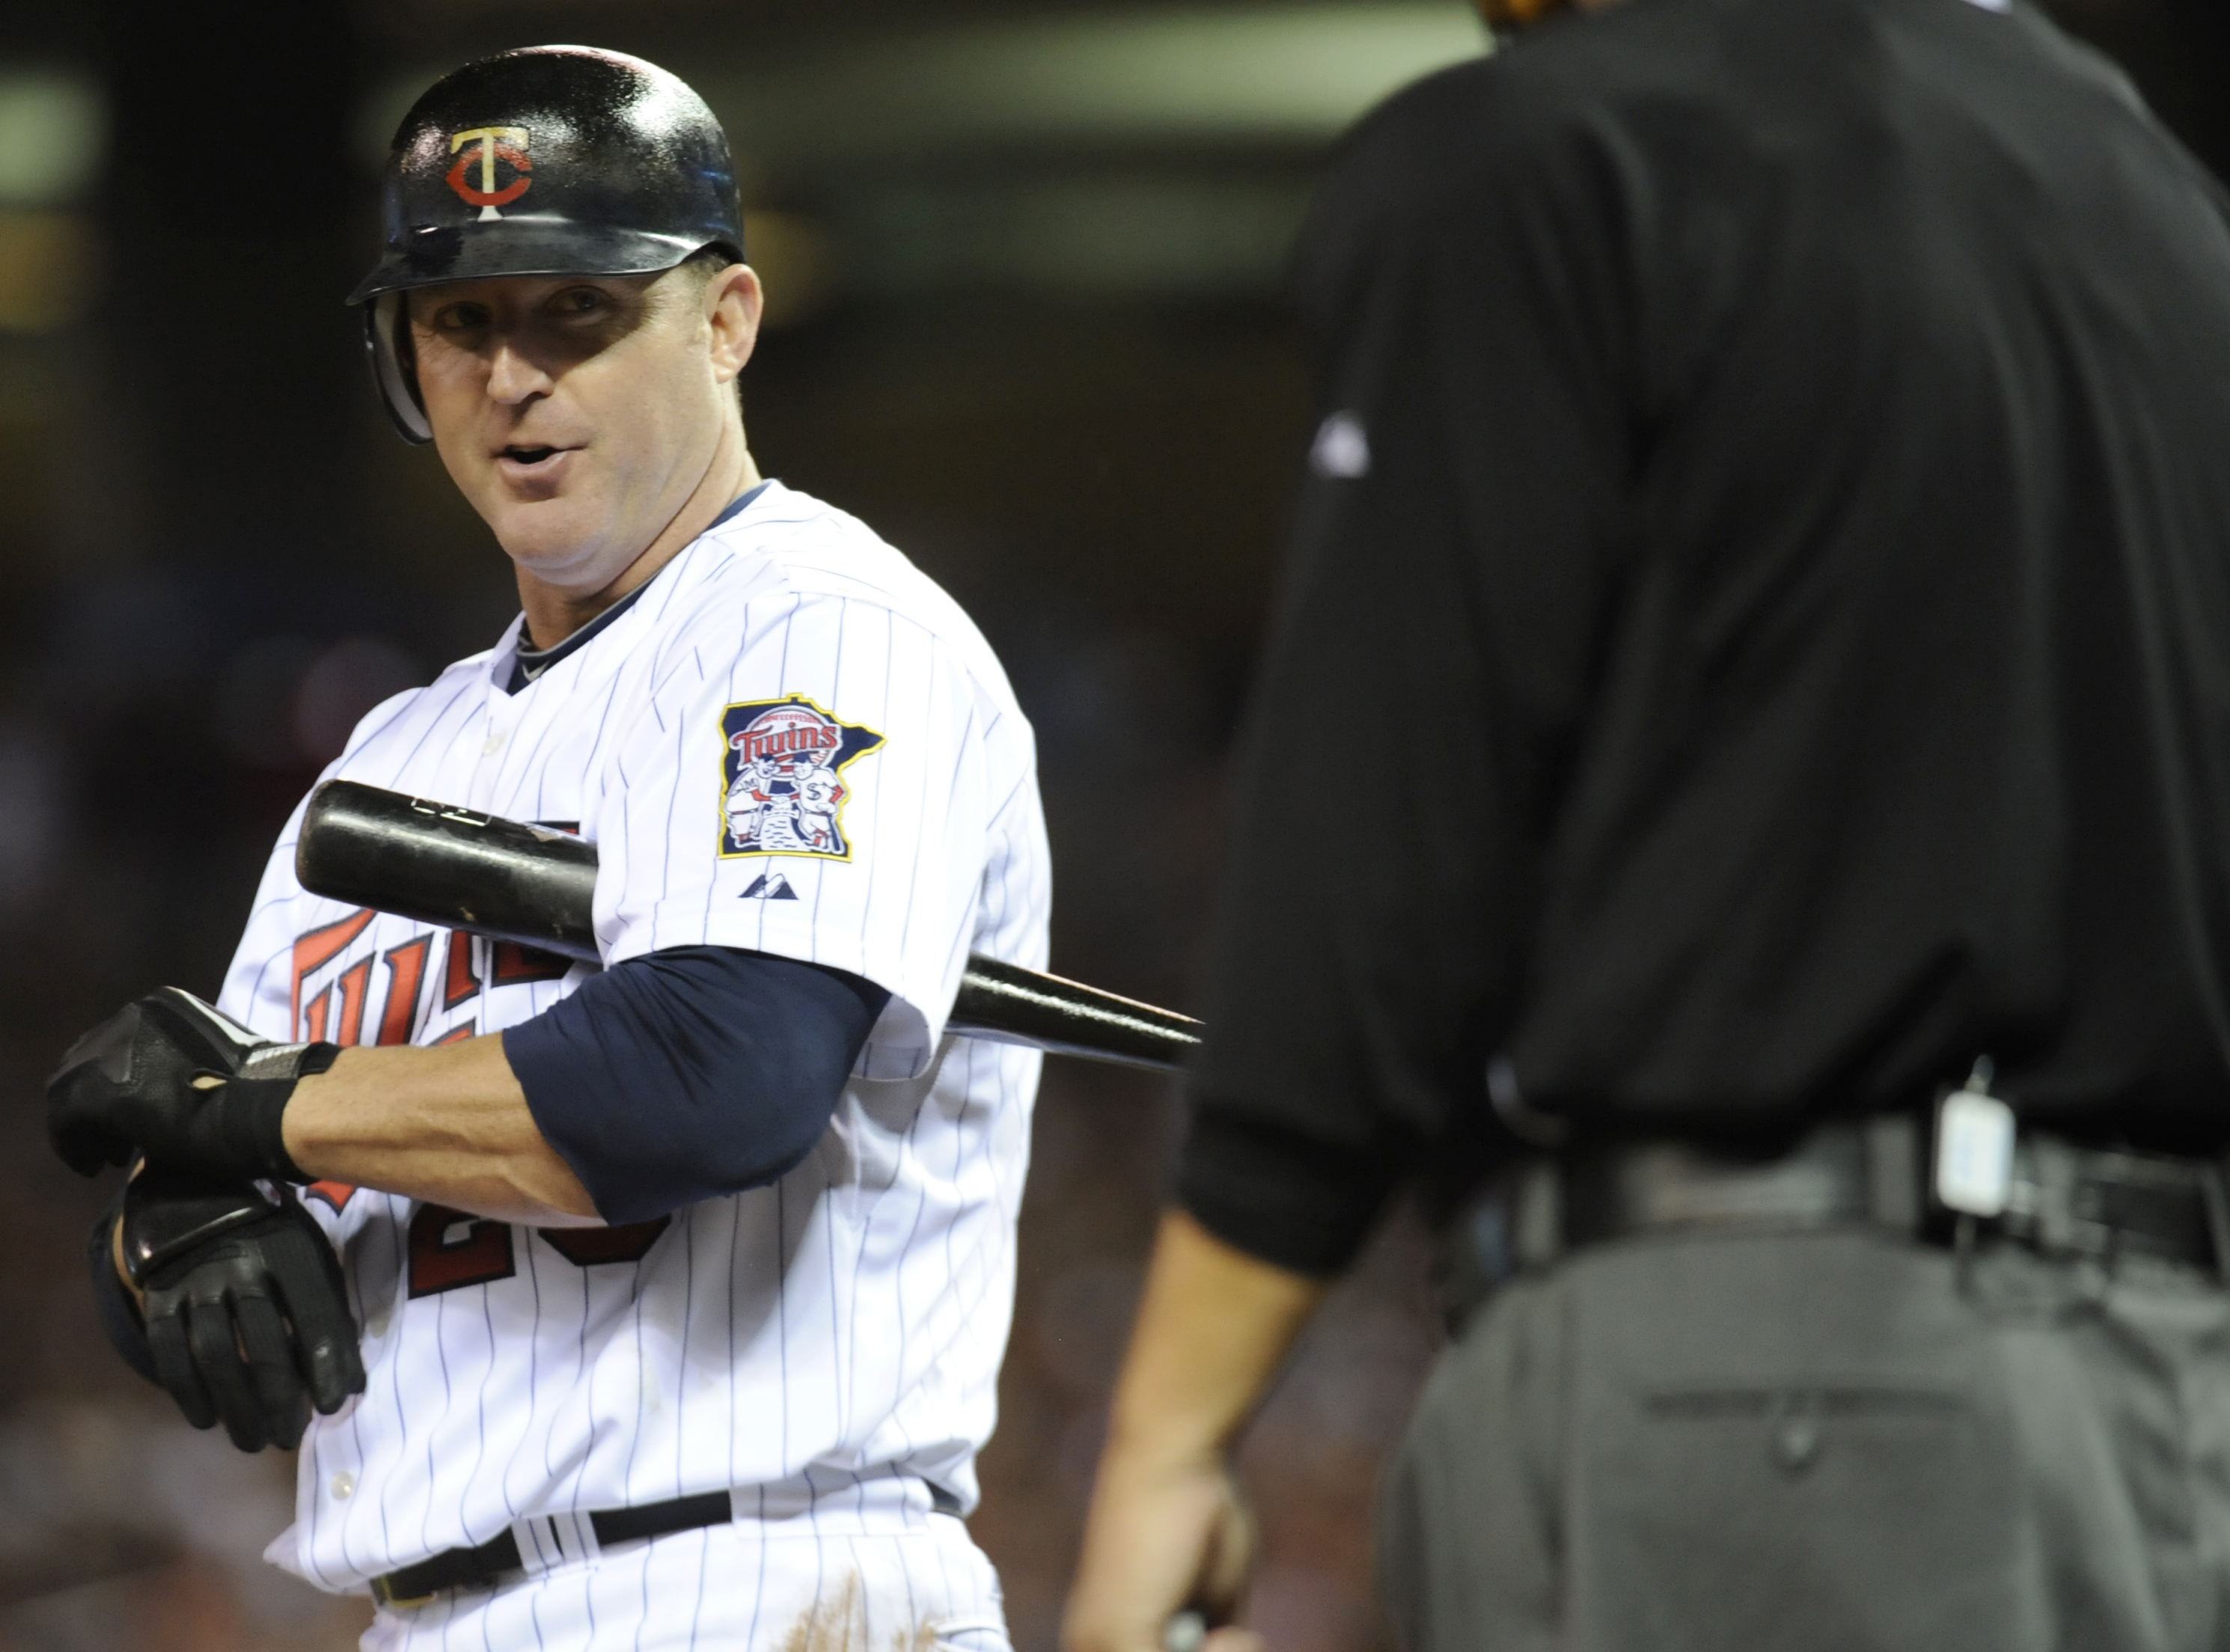 MINNEAPOLIS, MN - OCTOBER 6: Jim Thome #25 of the Minnesota Twins speaks with home plate umpire Jerry Crawford #2 during game one of the ALDS against the New York Yankees on October 6, 2010 at Target Field in Minneapolis, Minnesota. (Photo by Hannah Fosli